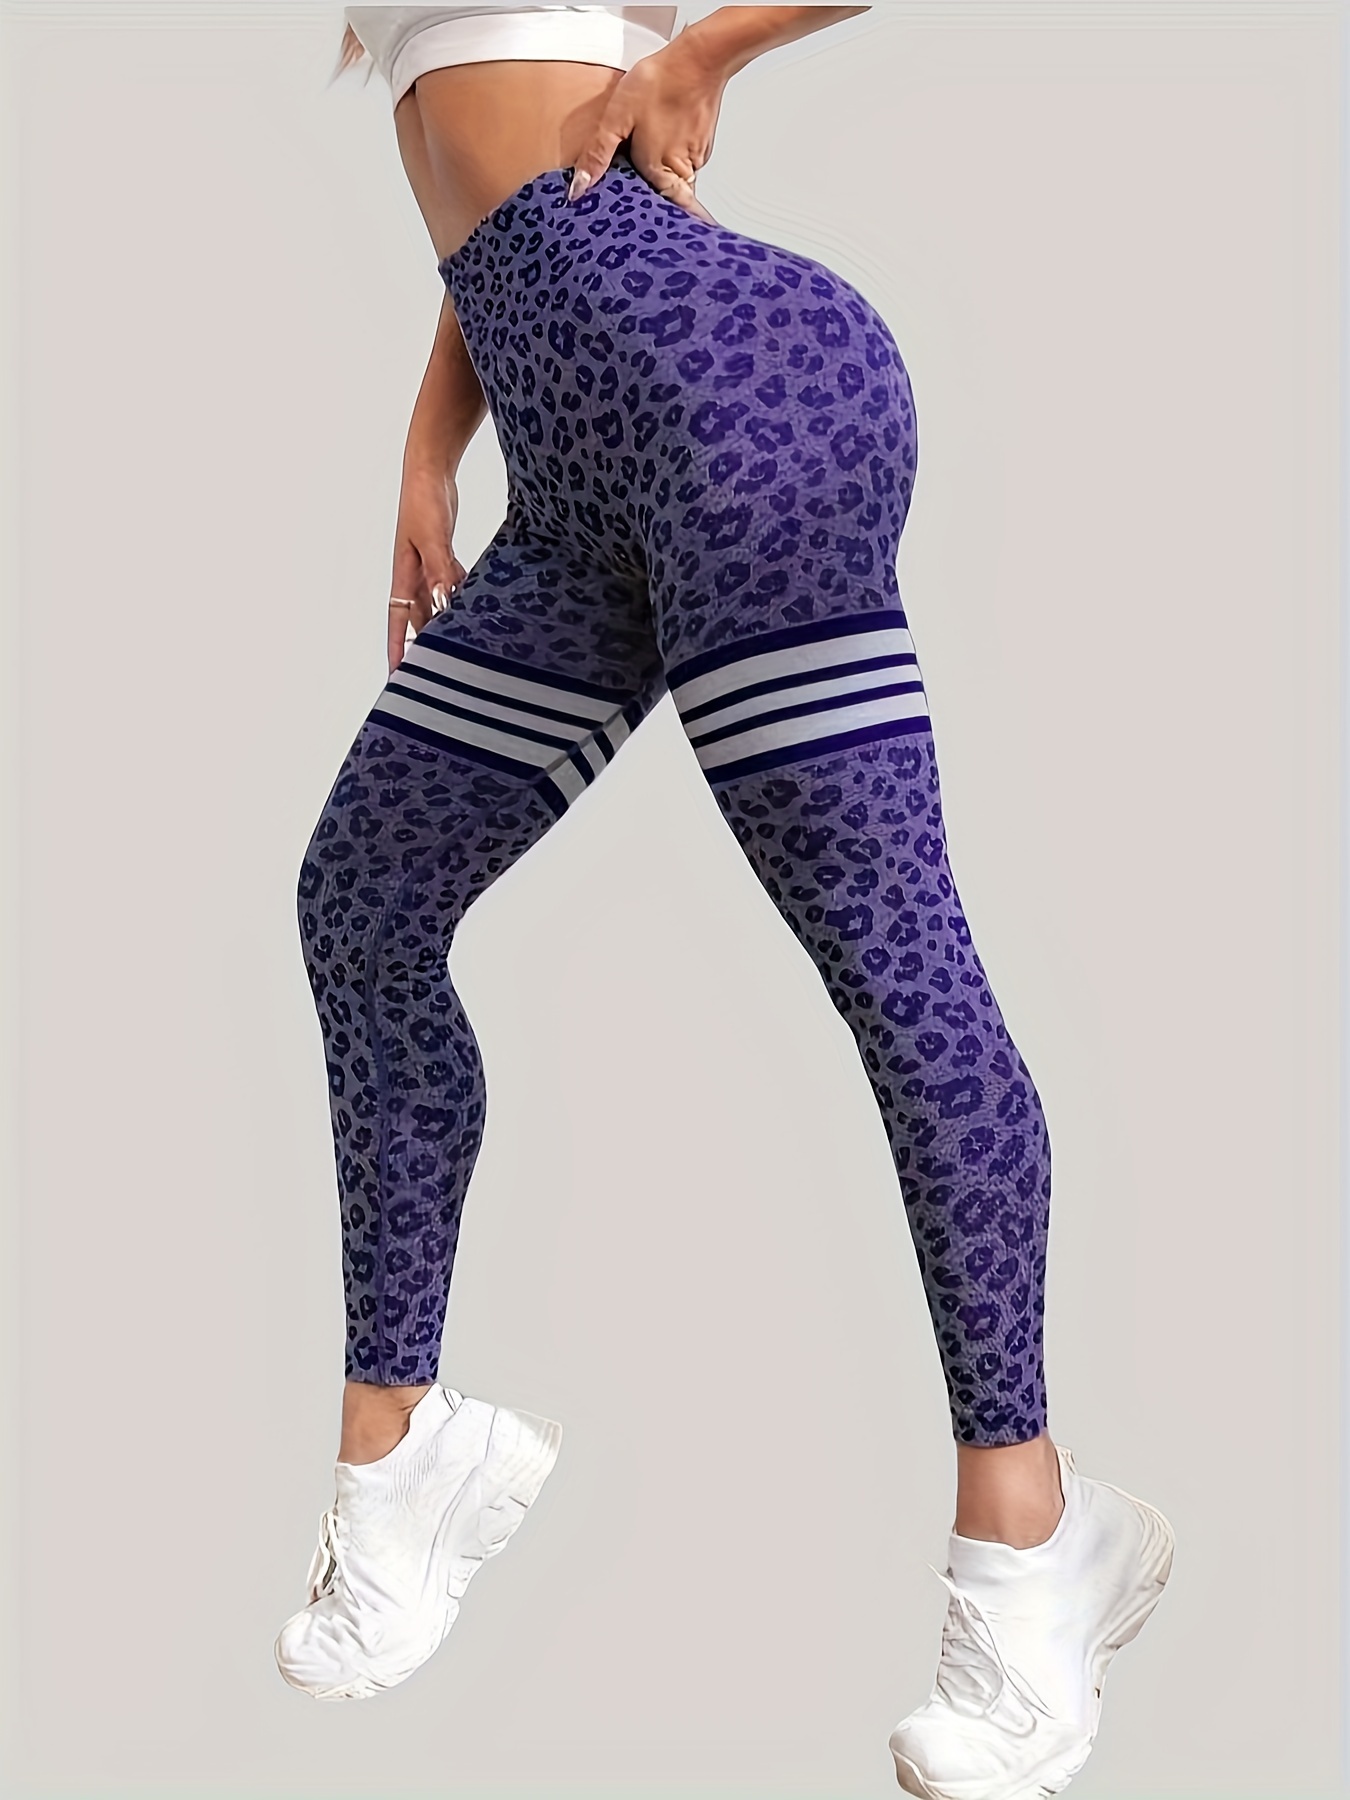 Leopard Print Sports Leggings, Outdoor Casual Workout High Waist Stretch  Skinny Running Pants, Fitness Tummy Control Yoga Leggings